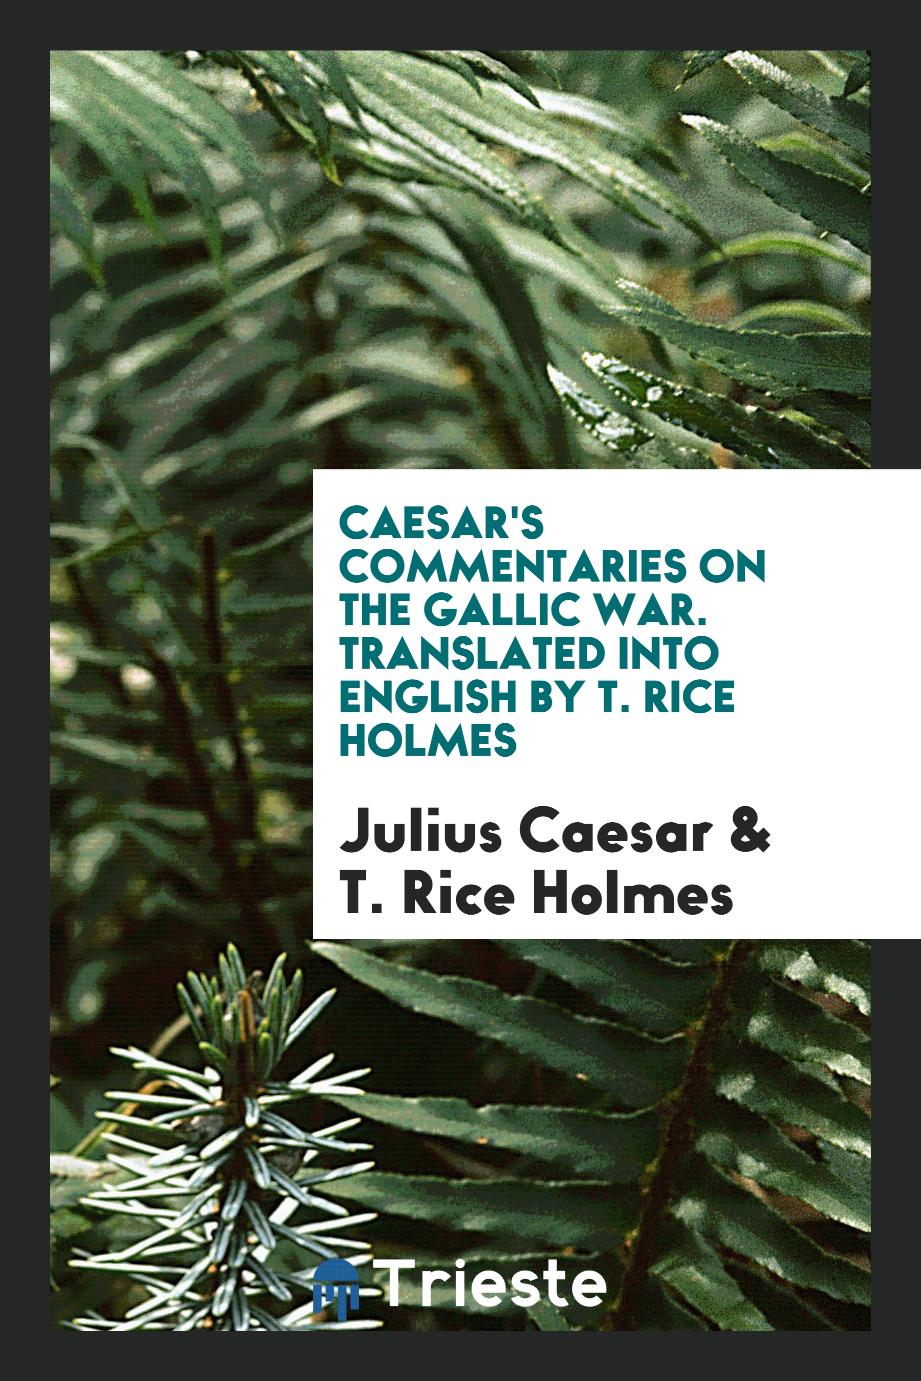 Caesar's Commentaries on the Gallic War. Translated into English by T. Rice Holmes